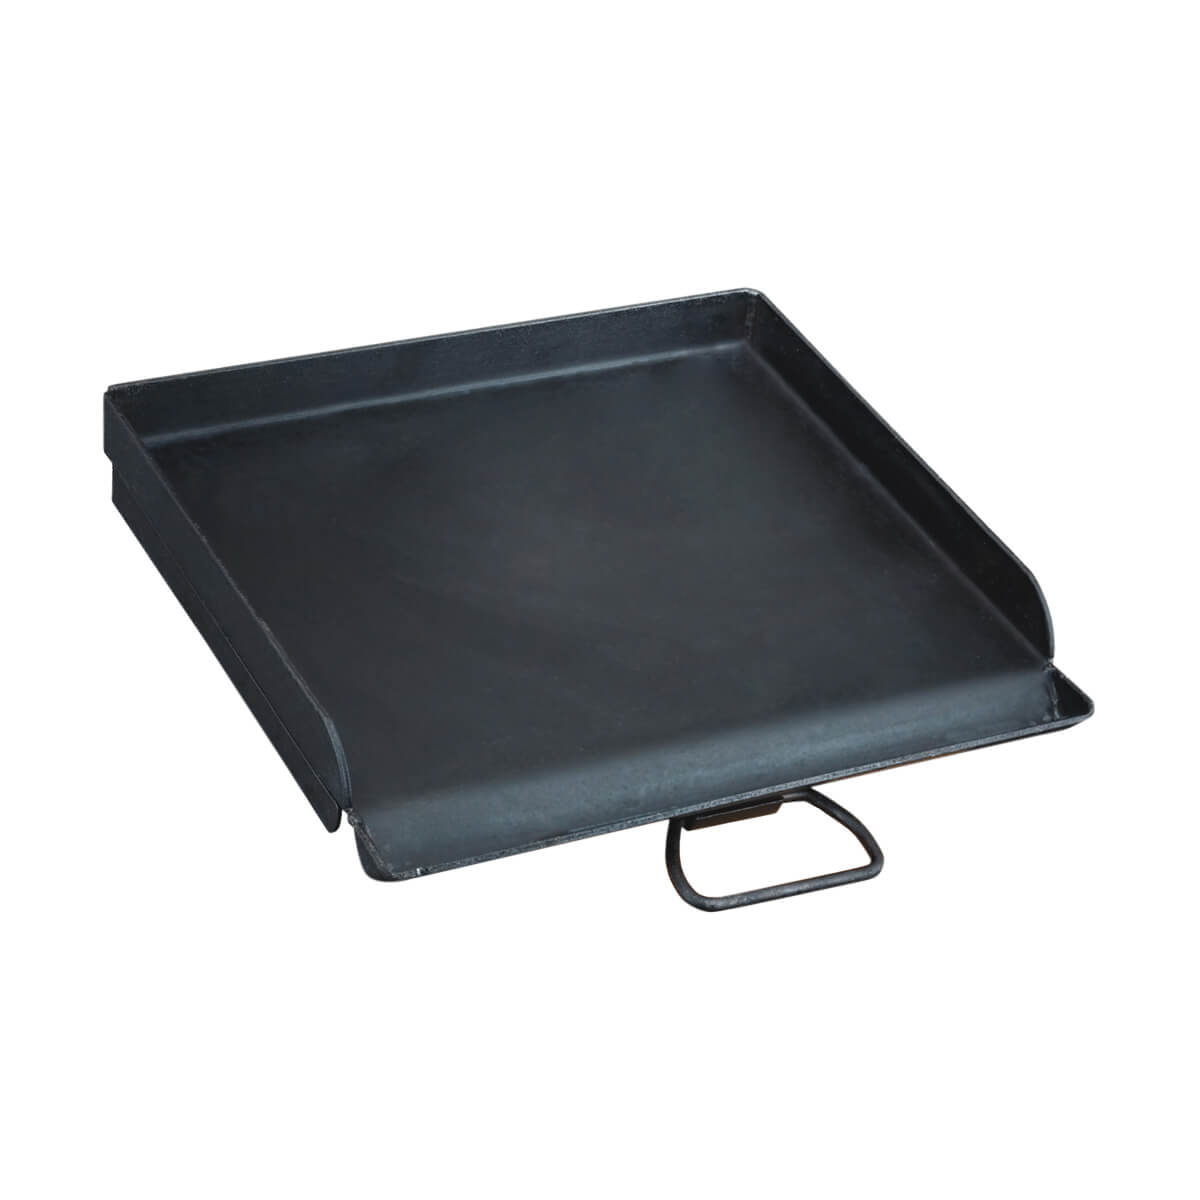 Professional Flat Top Griddle - 14-in x 16-in